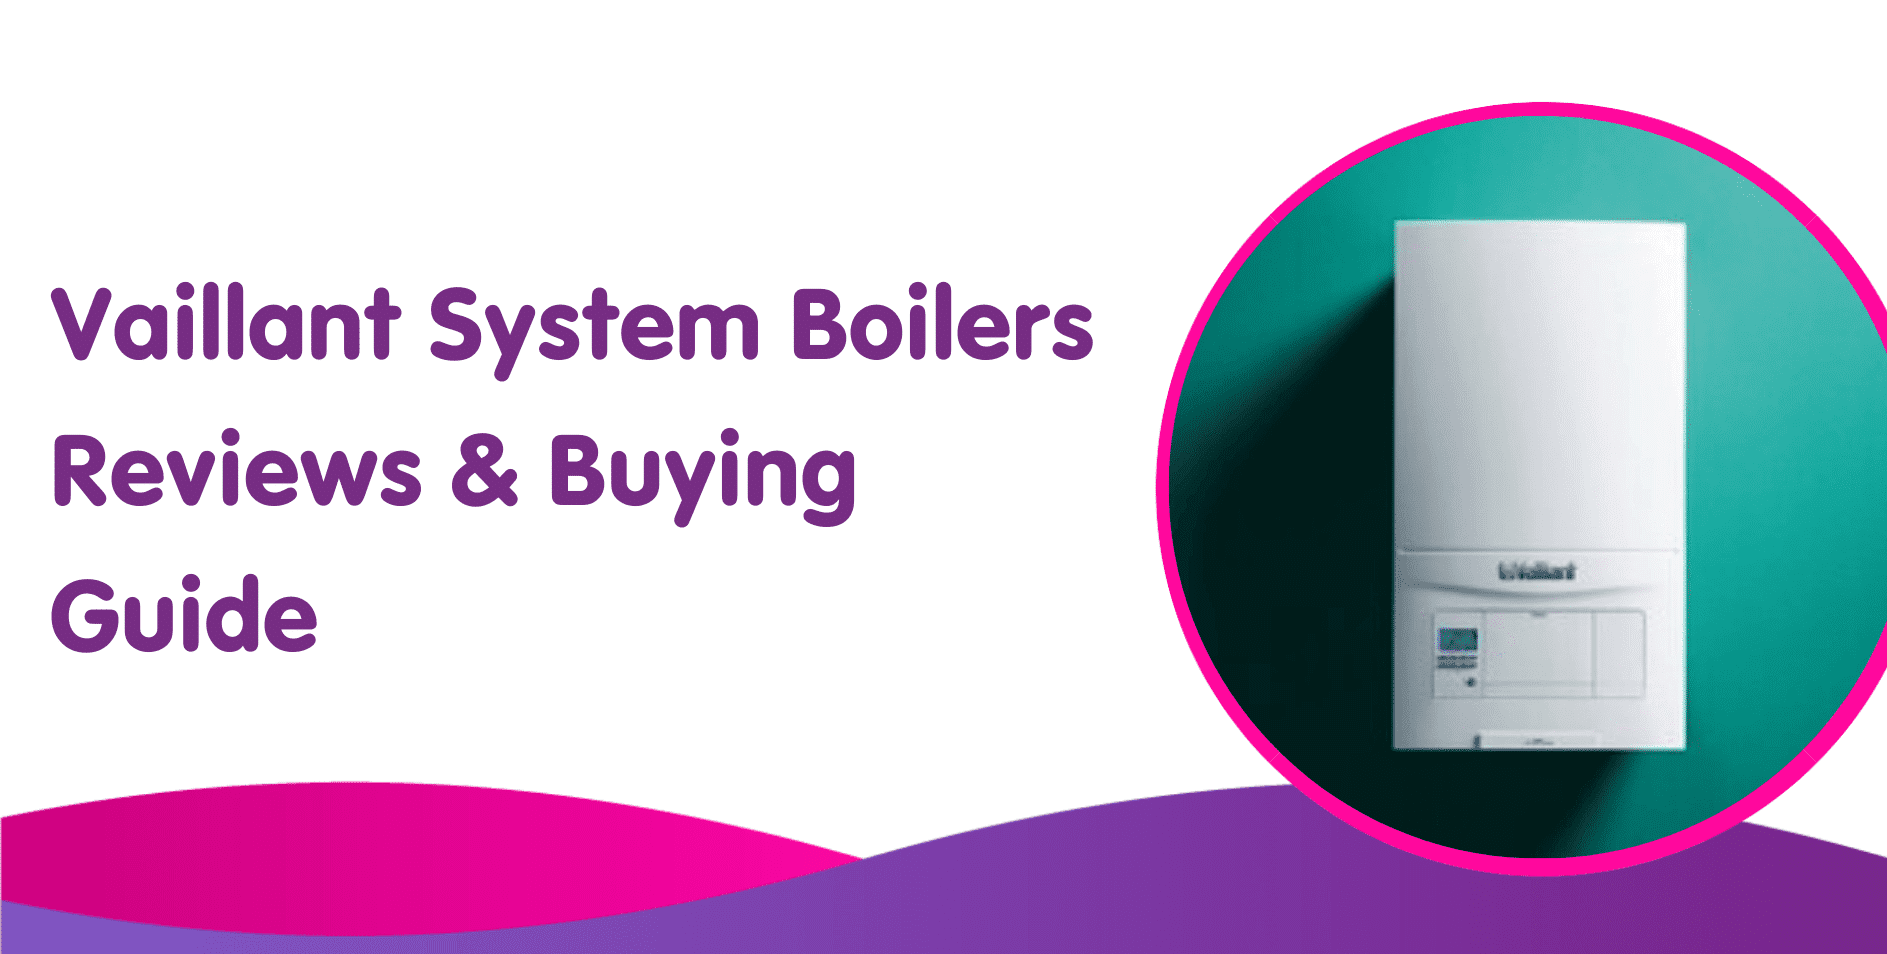 Vaillant System Boilers Reviews & Buying Guide